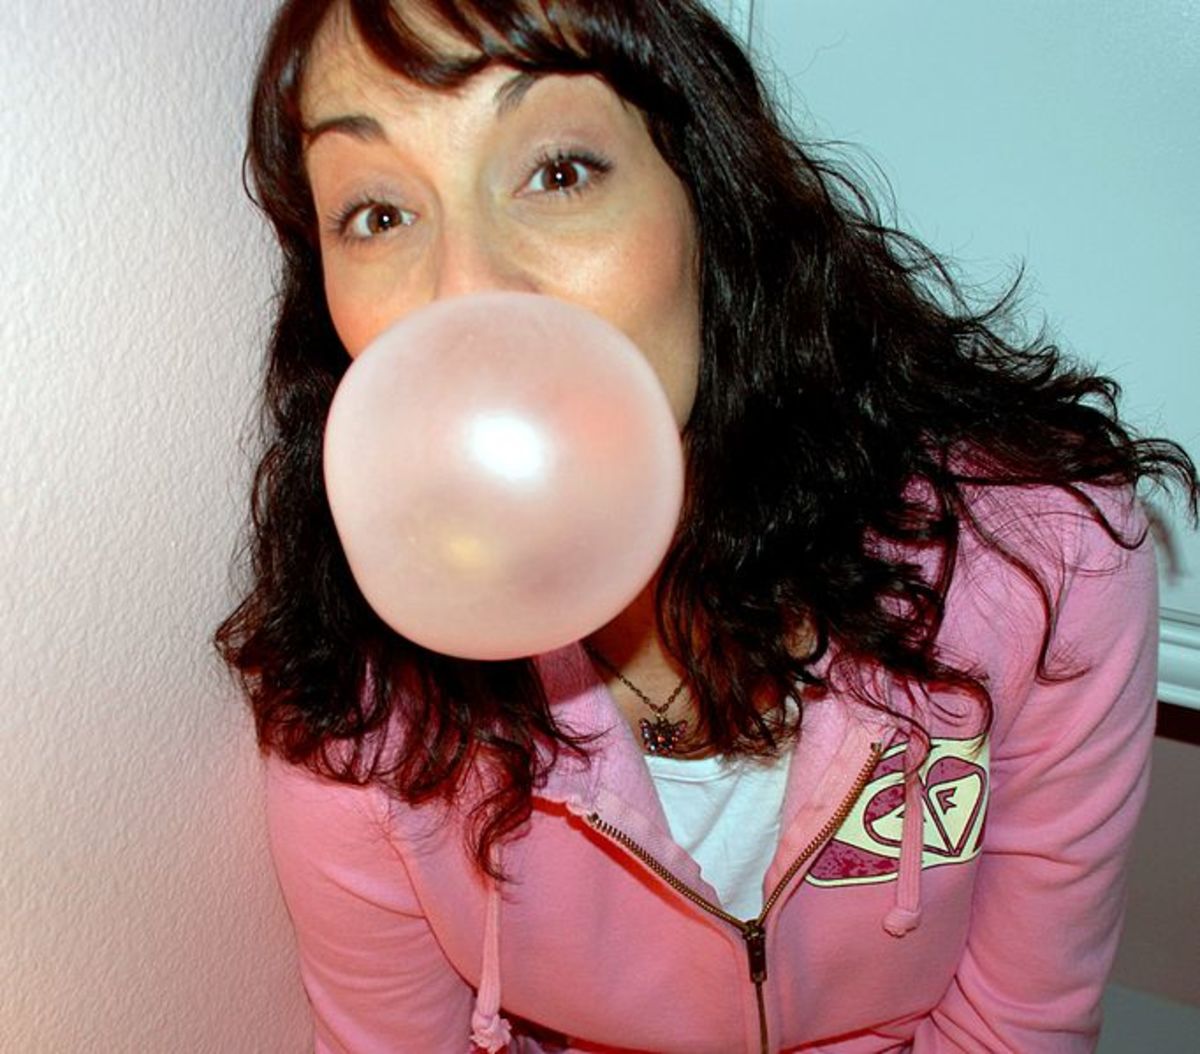 This article will take a look at the history of bubble gum.